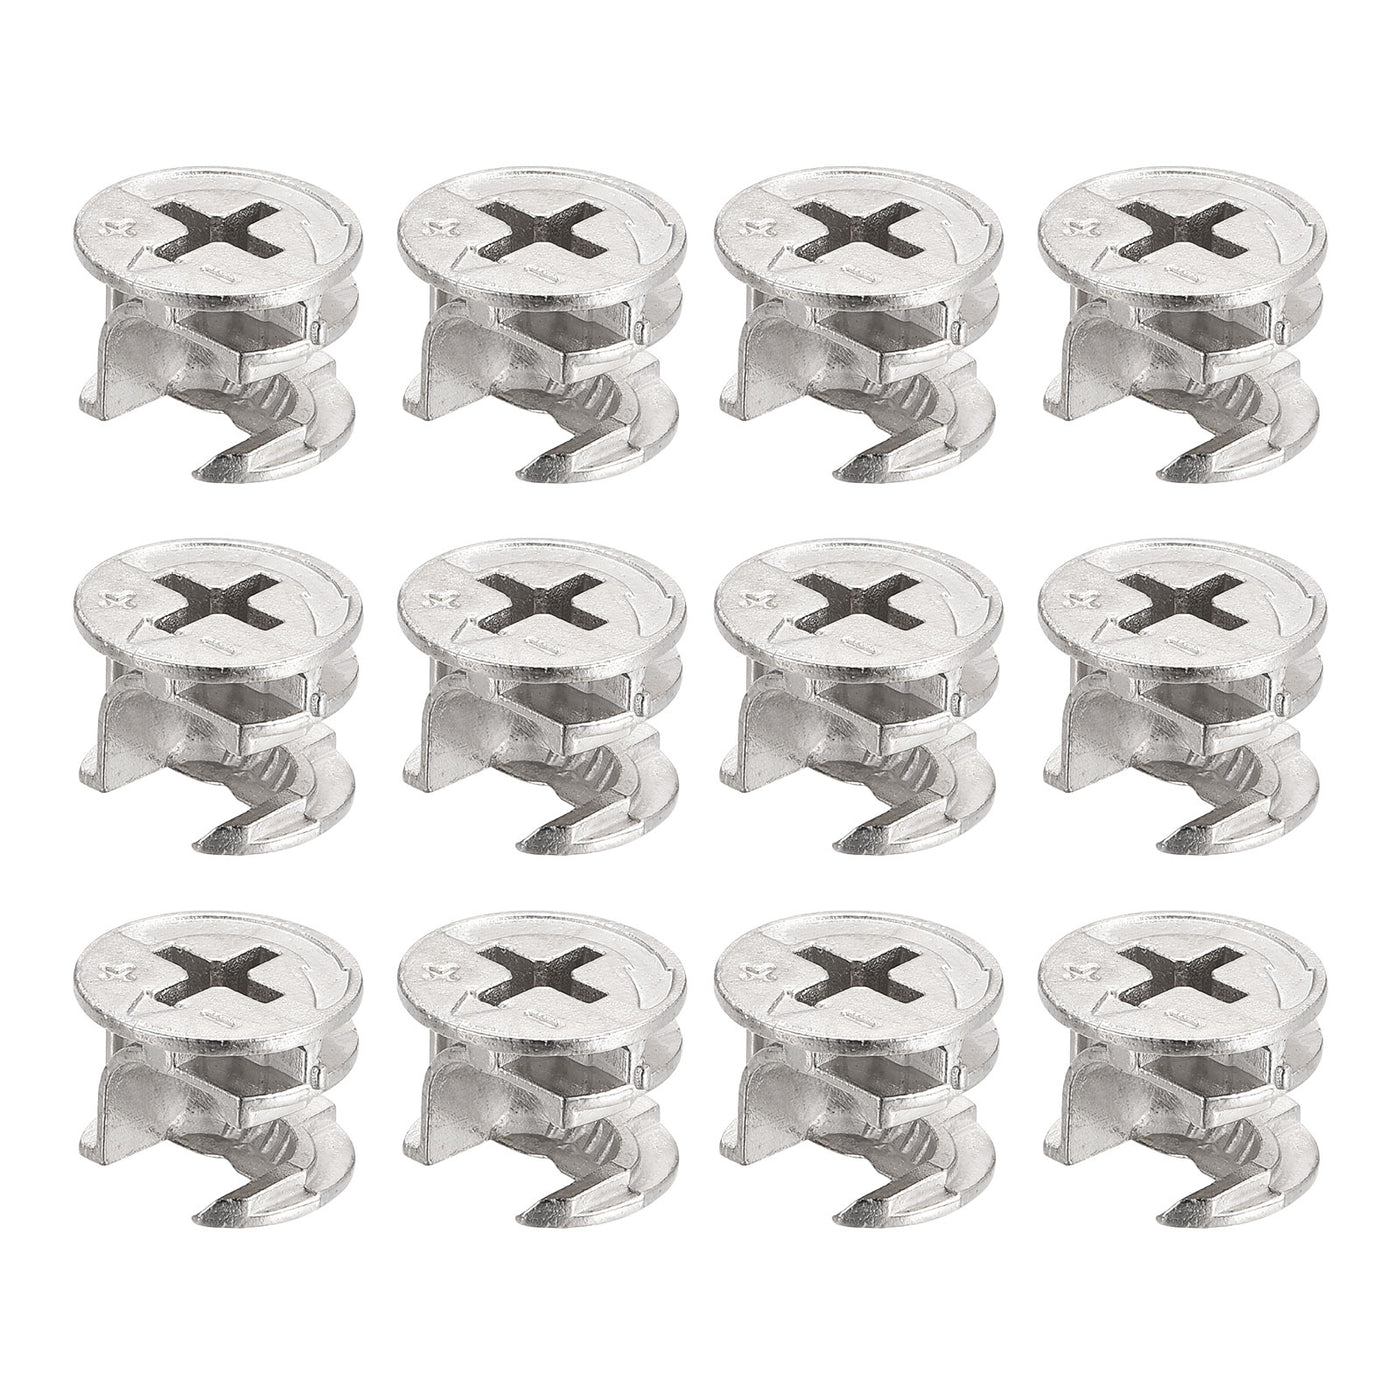 Uxcell Uxcell Cam Lock Nut for Furniture, 12pcs 14.6x11.1mm Joint Connector Locking Nuts